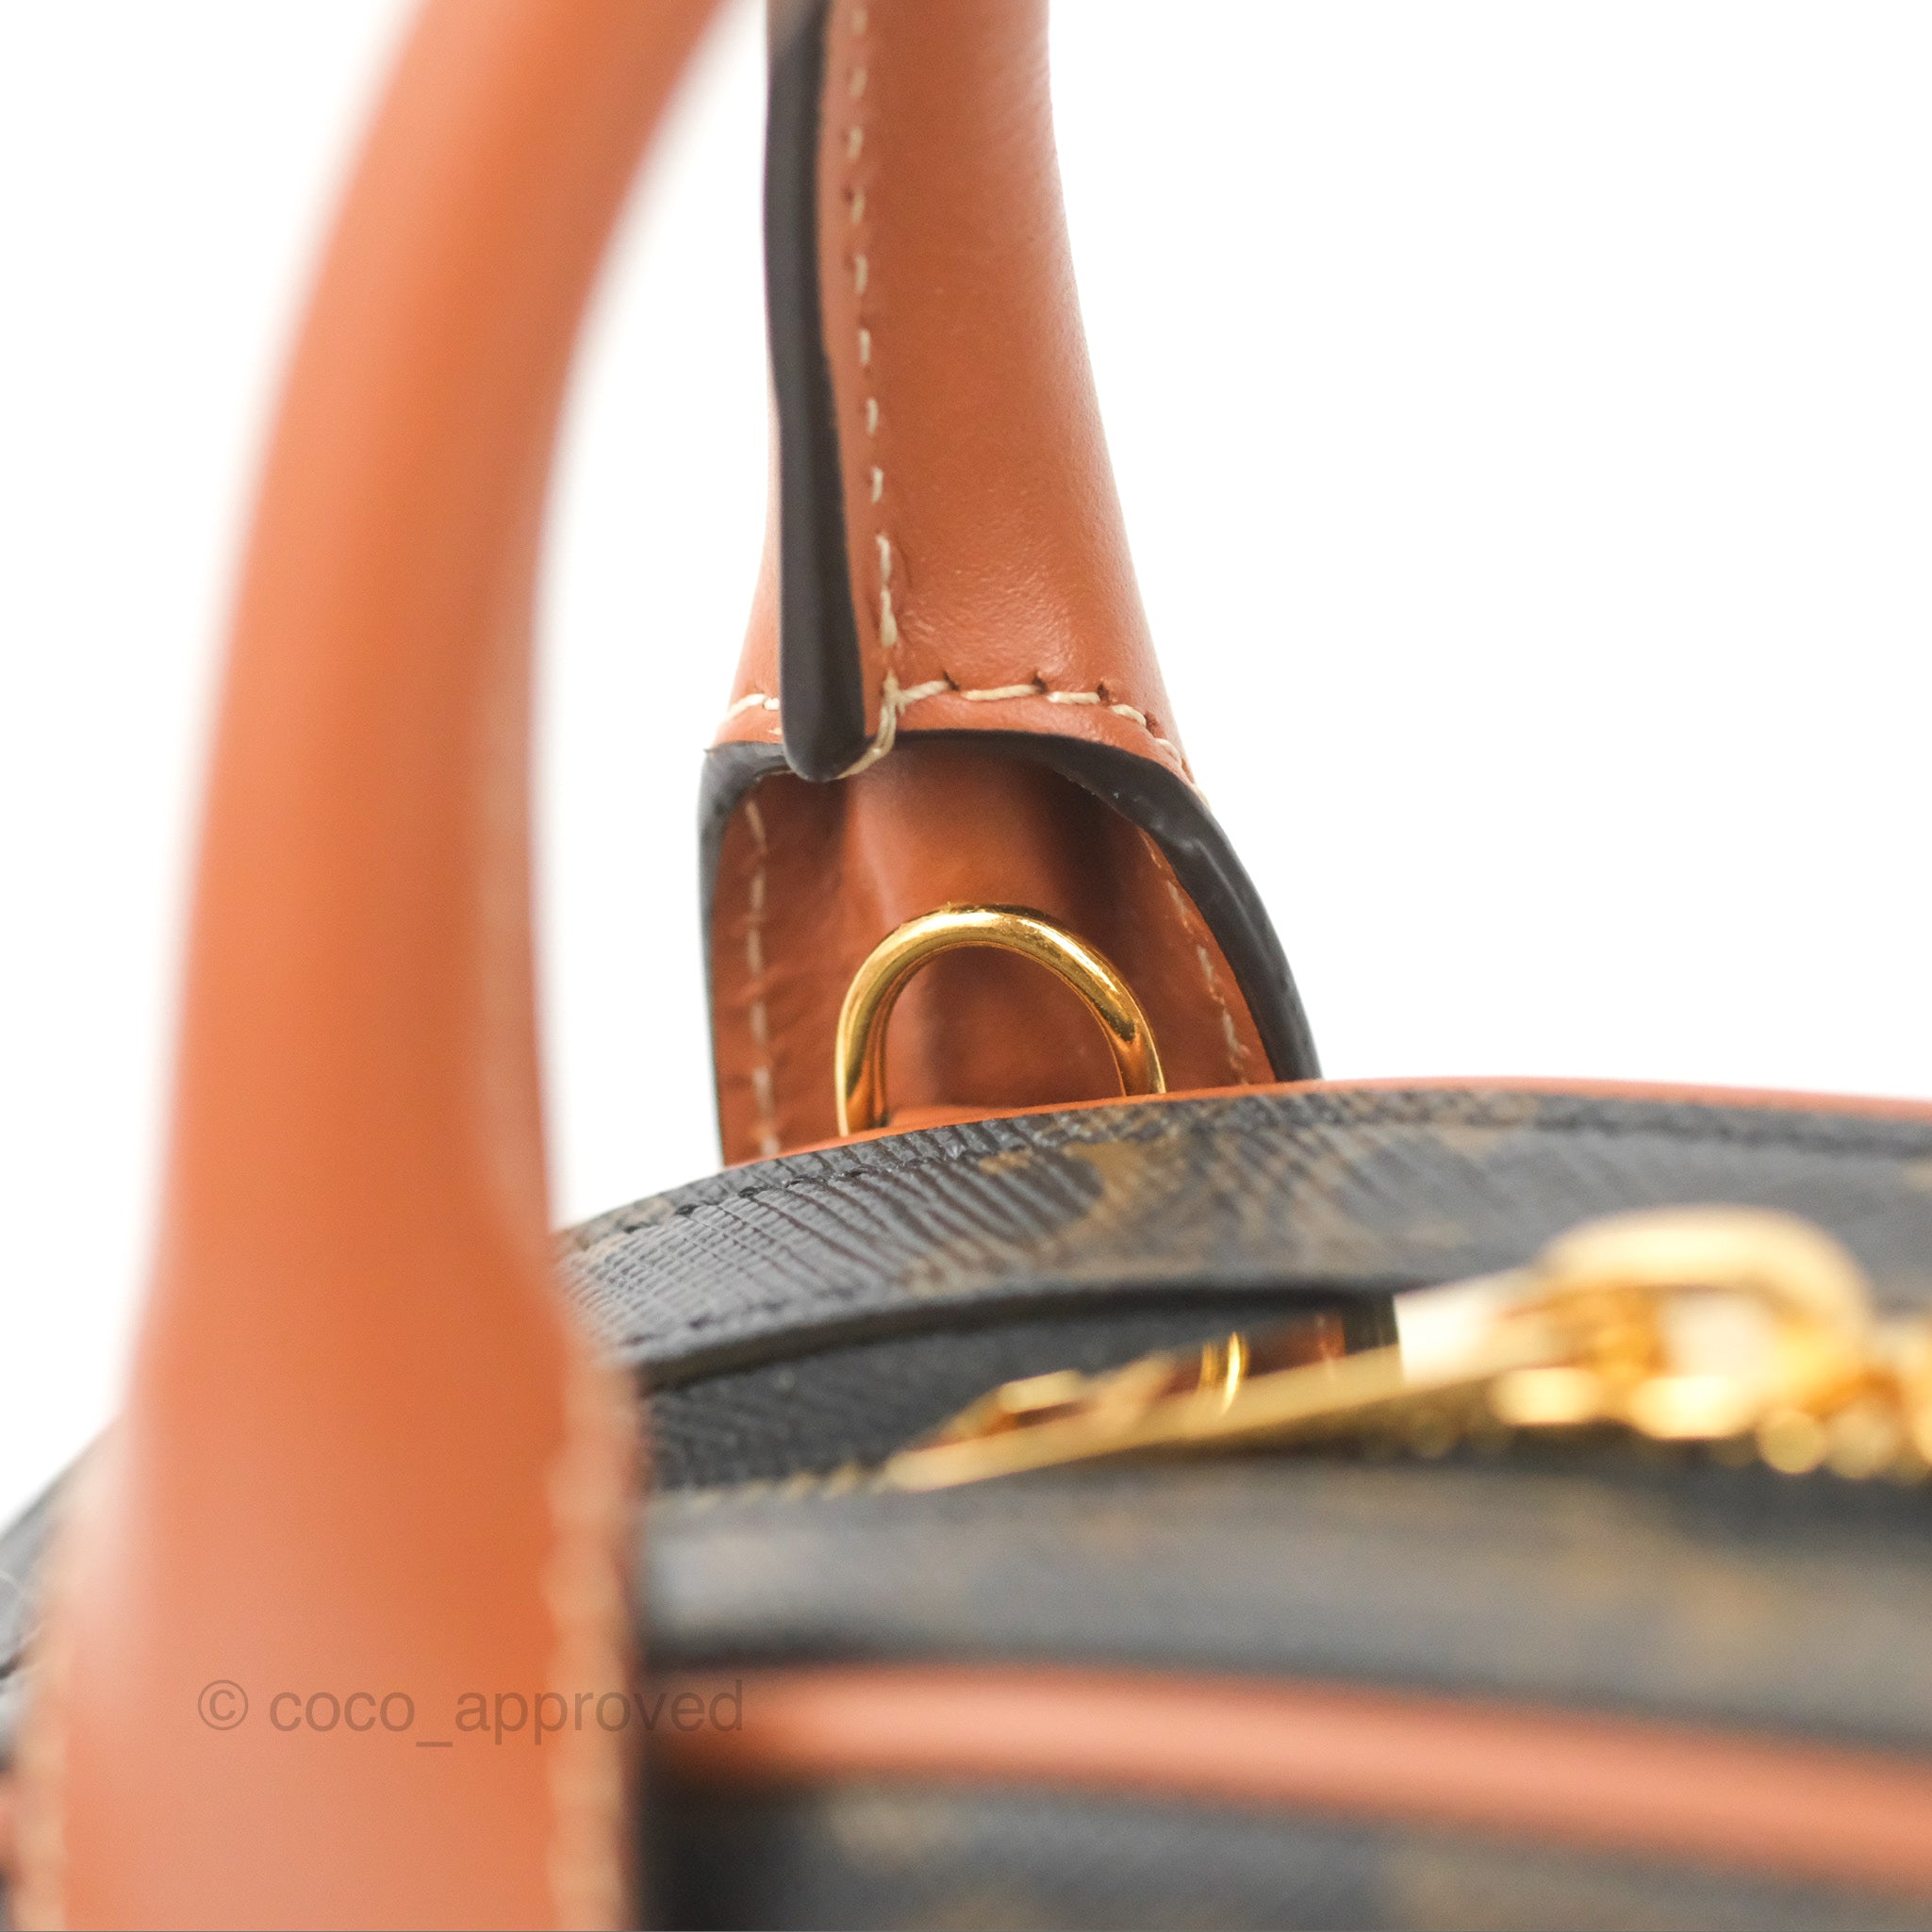 Triomphe vintage leather bowling bag Celine Brown in Leather